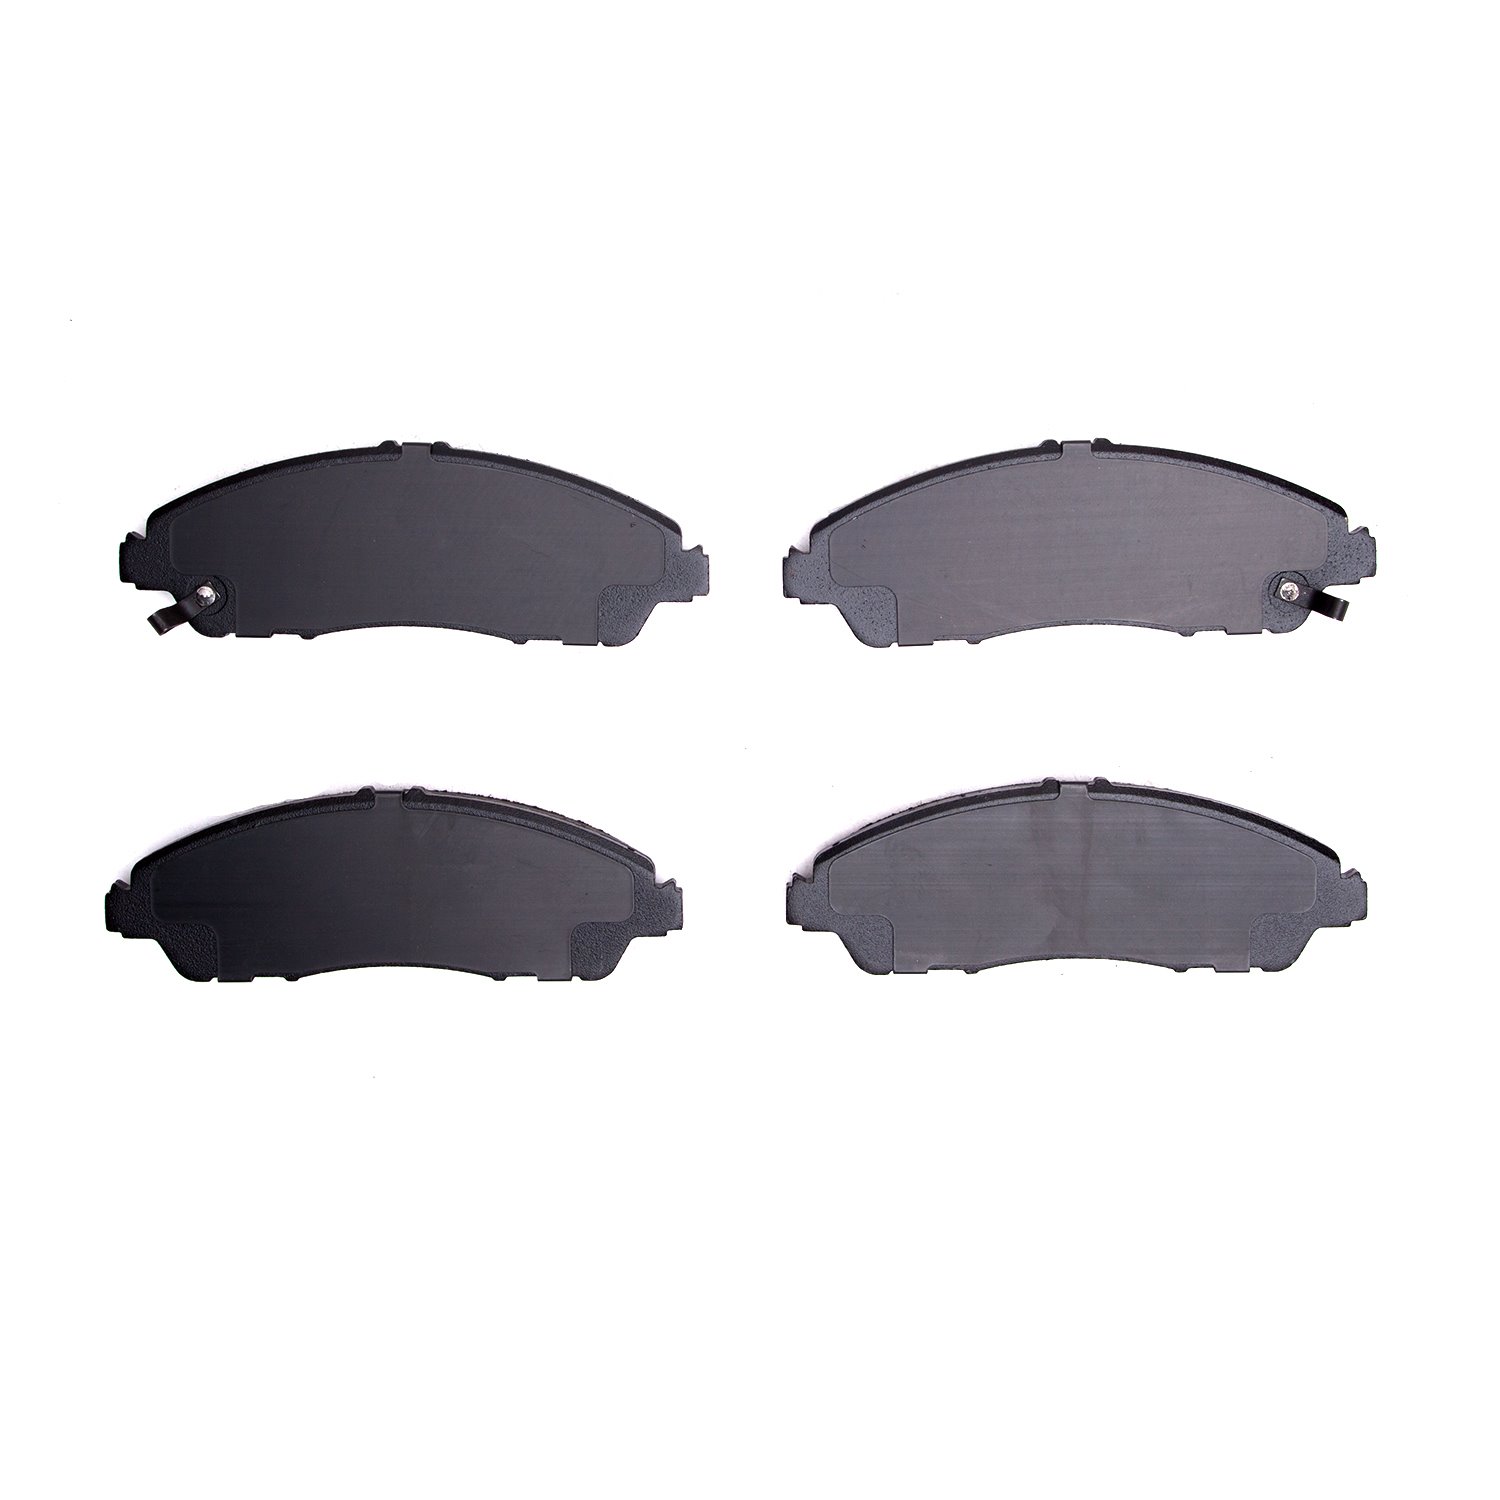 1310-1723-00 3000-Series Ceramic Brake Pads, Fits Select Acura/Honda, Position: Front